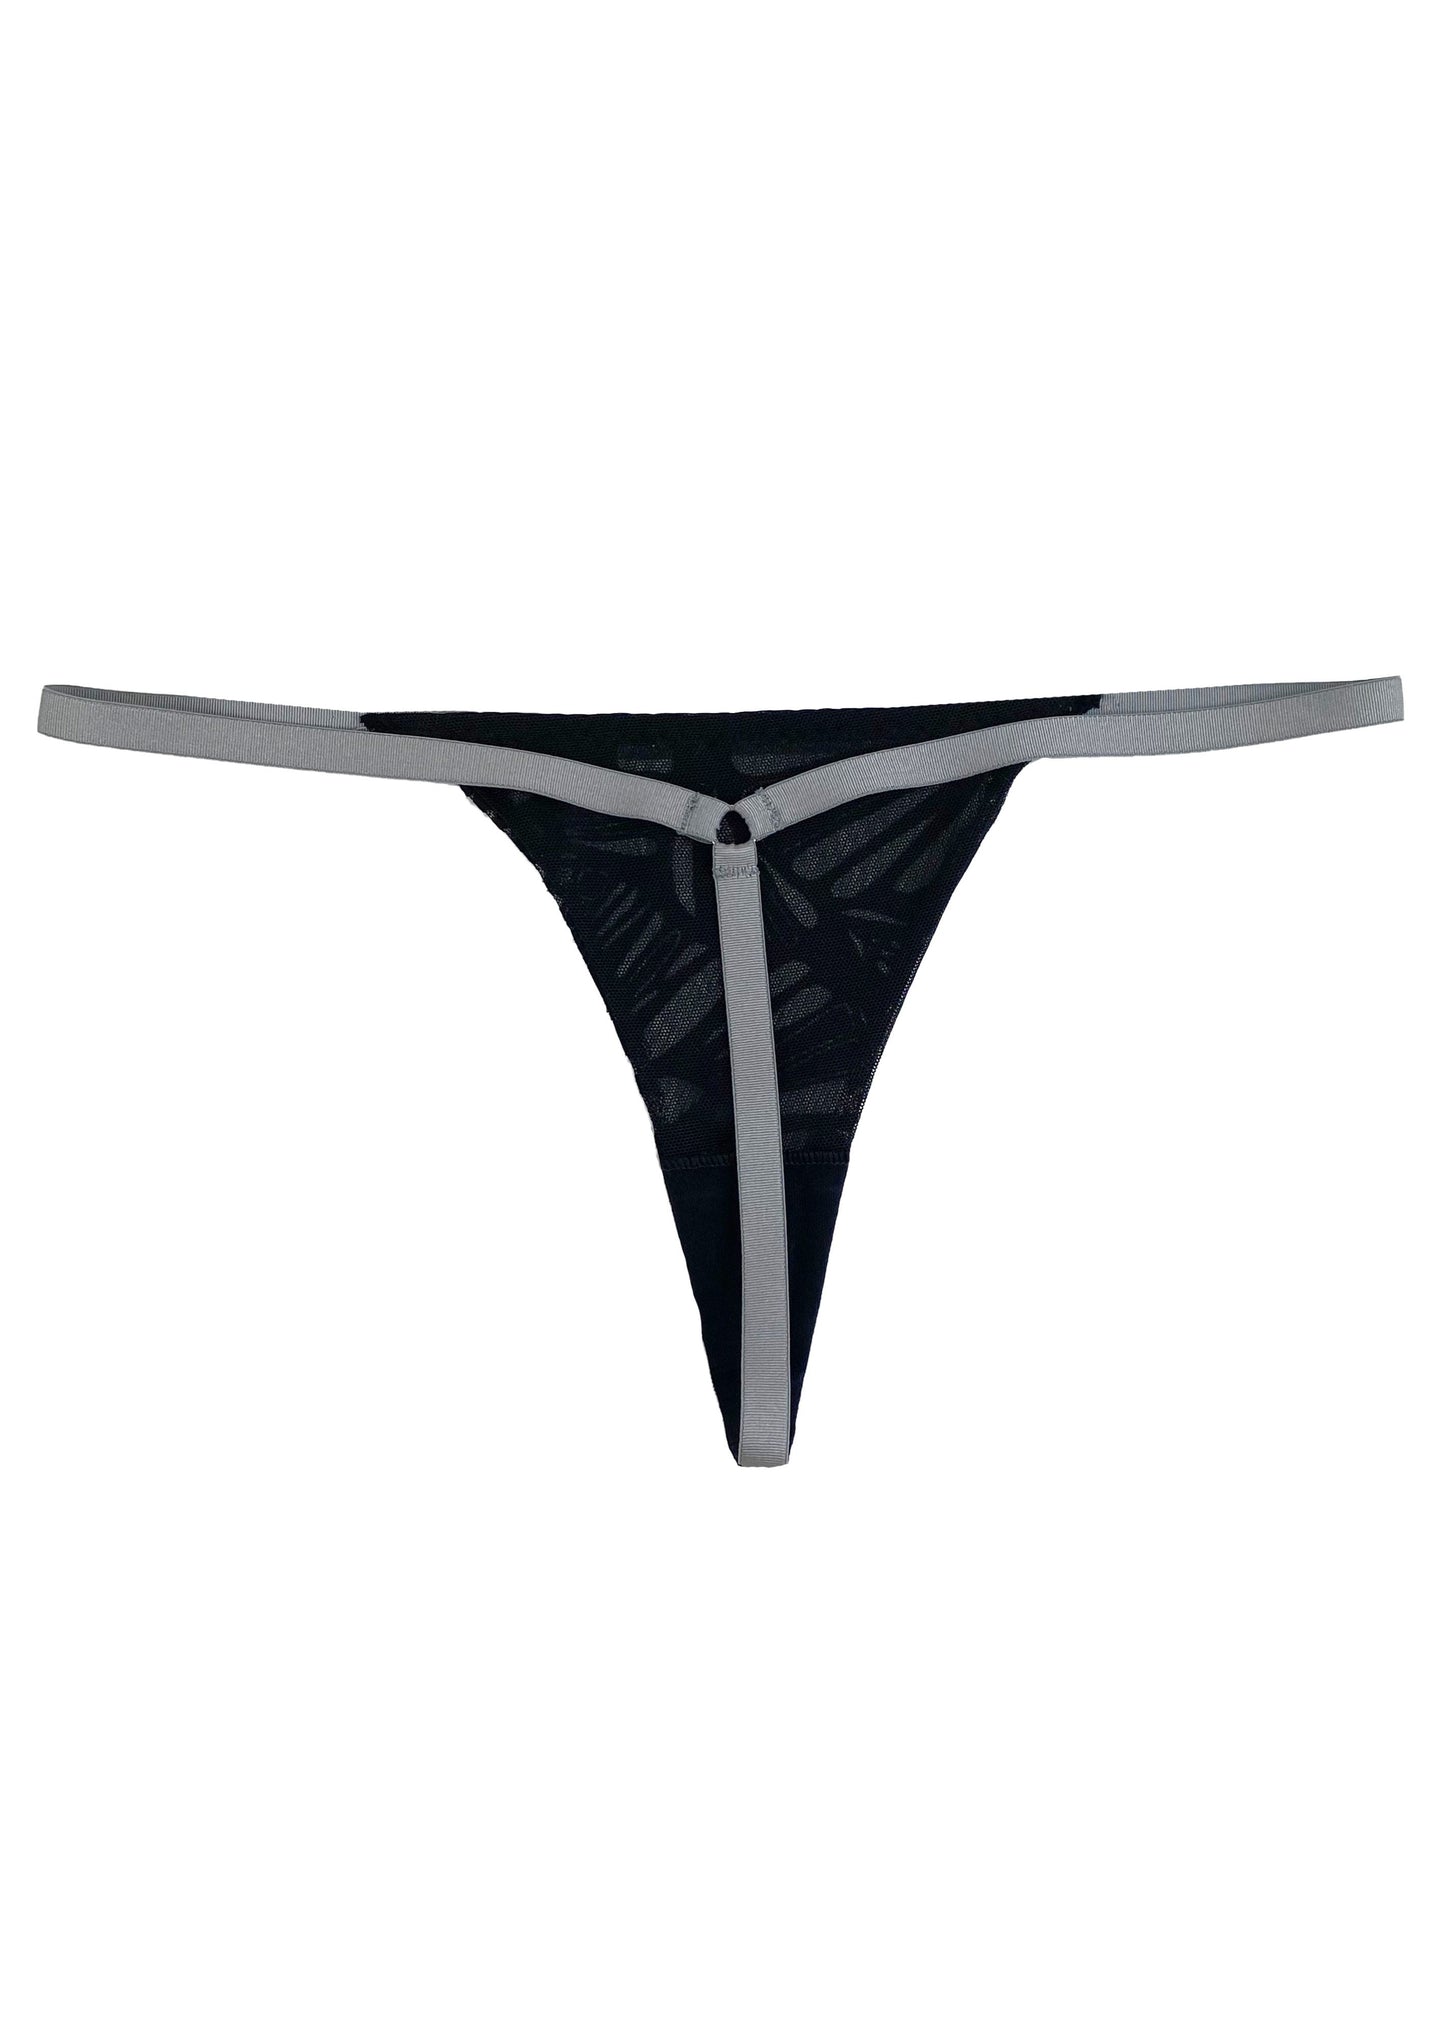 black thong from the back with gray background on white back drop